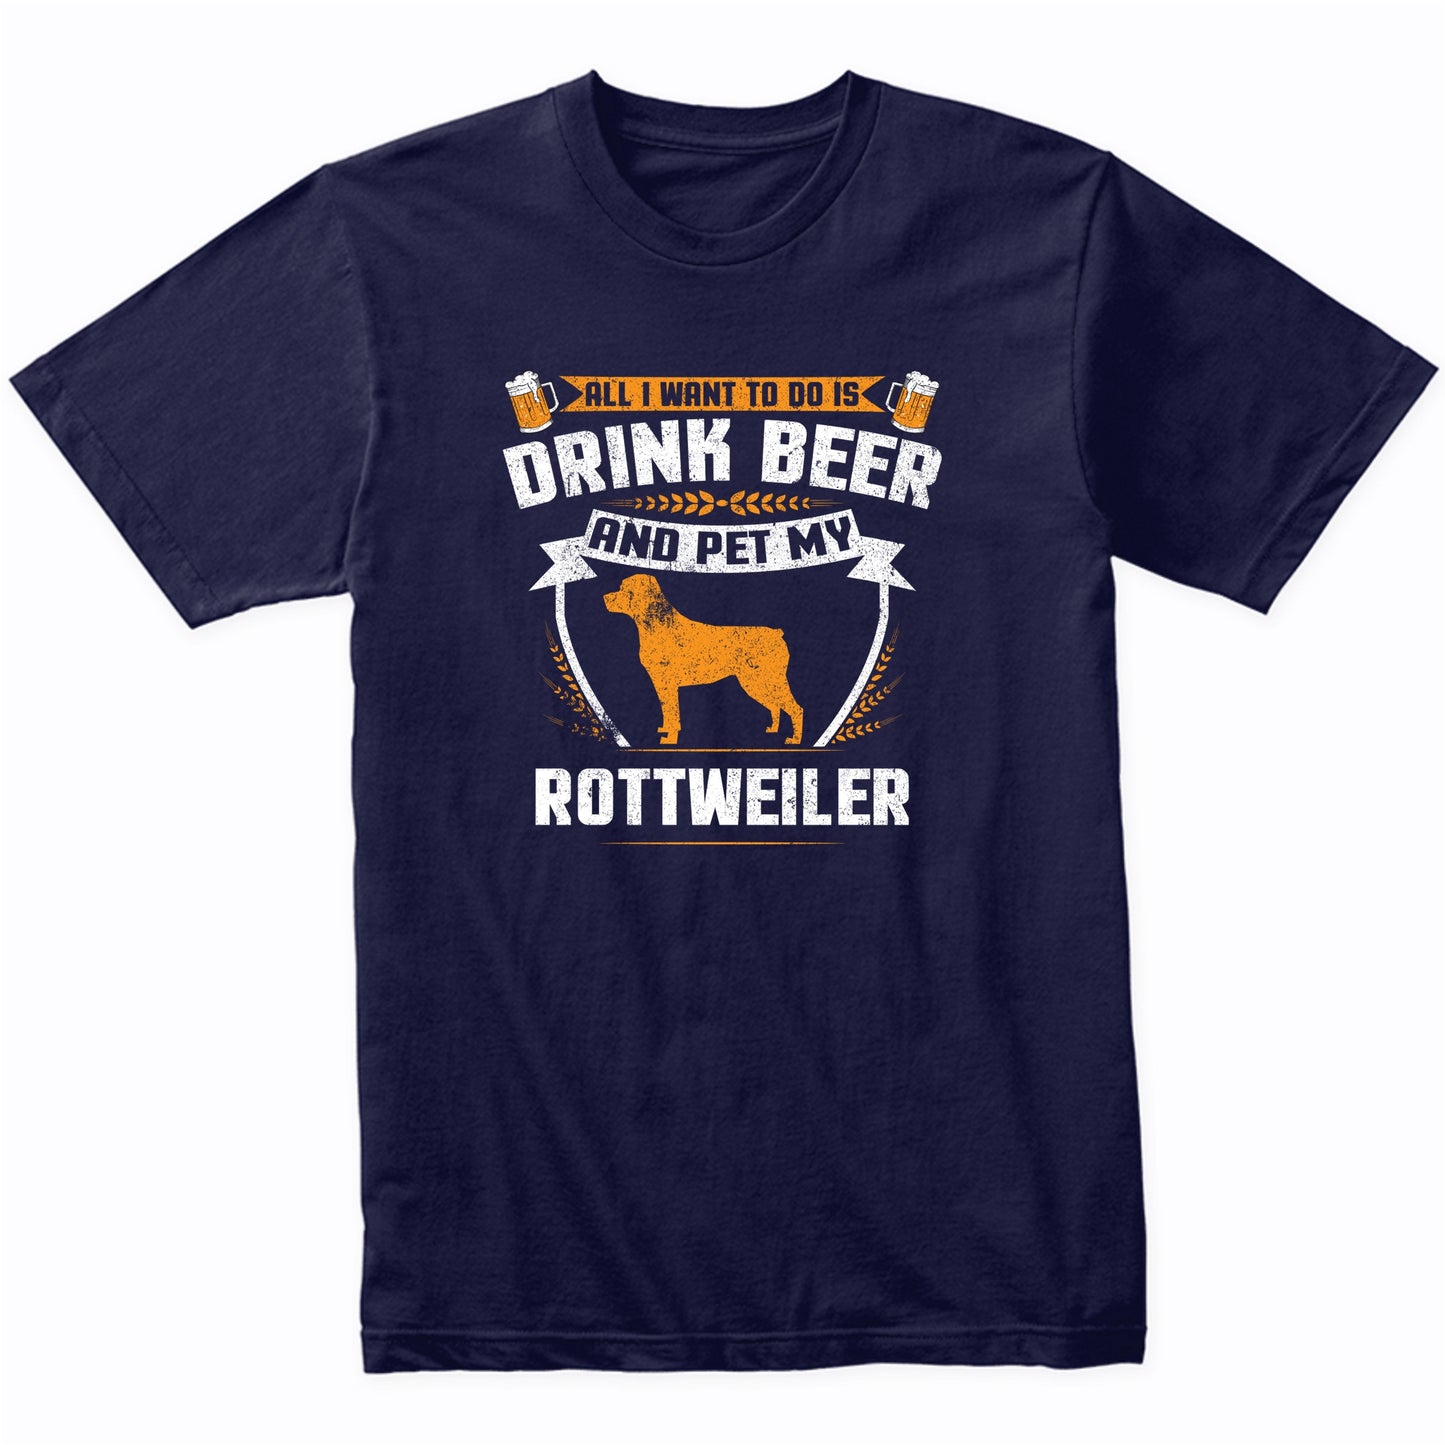 All I Want To Do Is Drink Beer And Pet My Rottweiler Funny Dog Owner Shirt